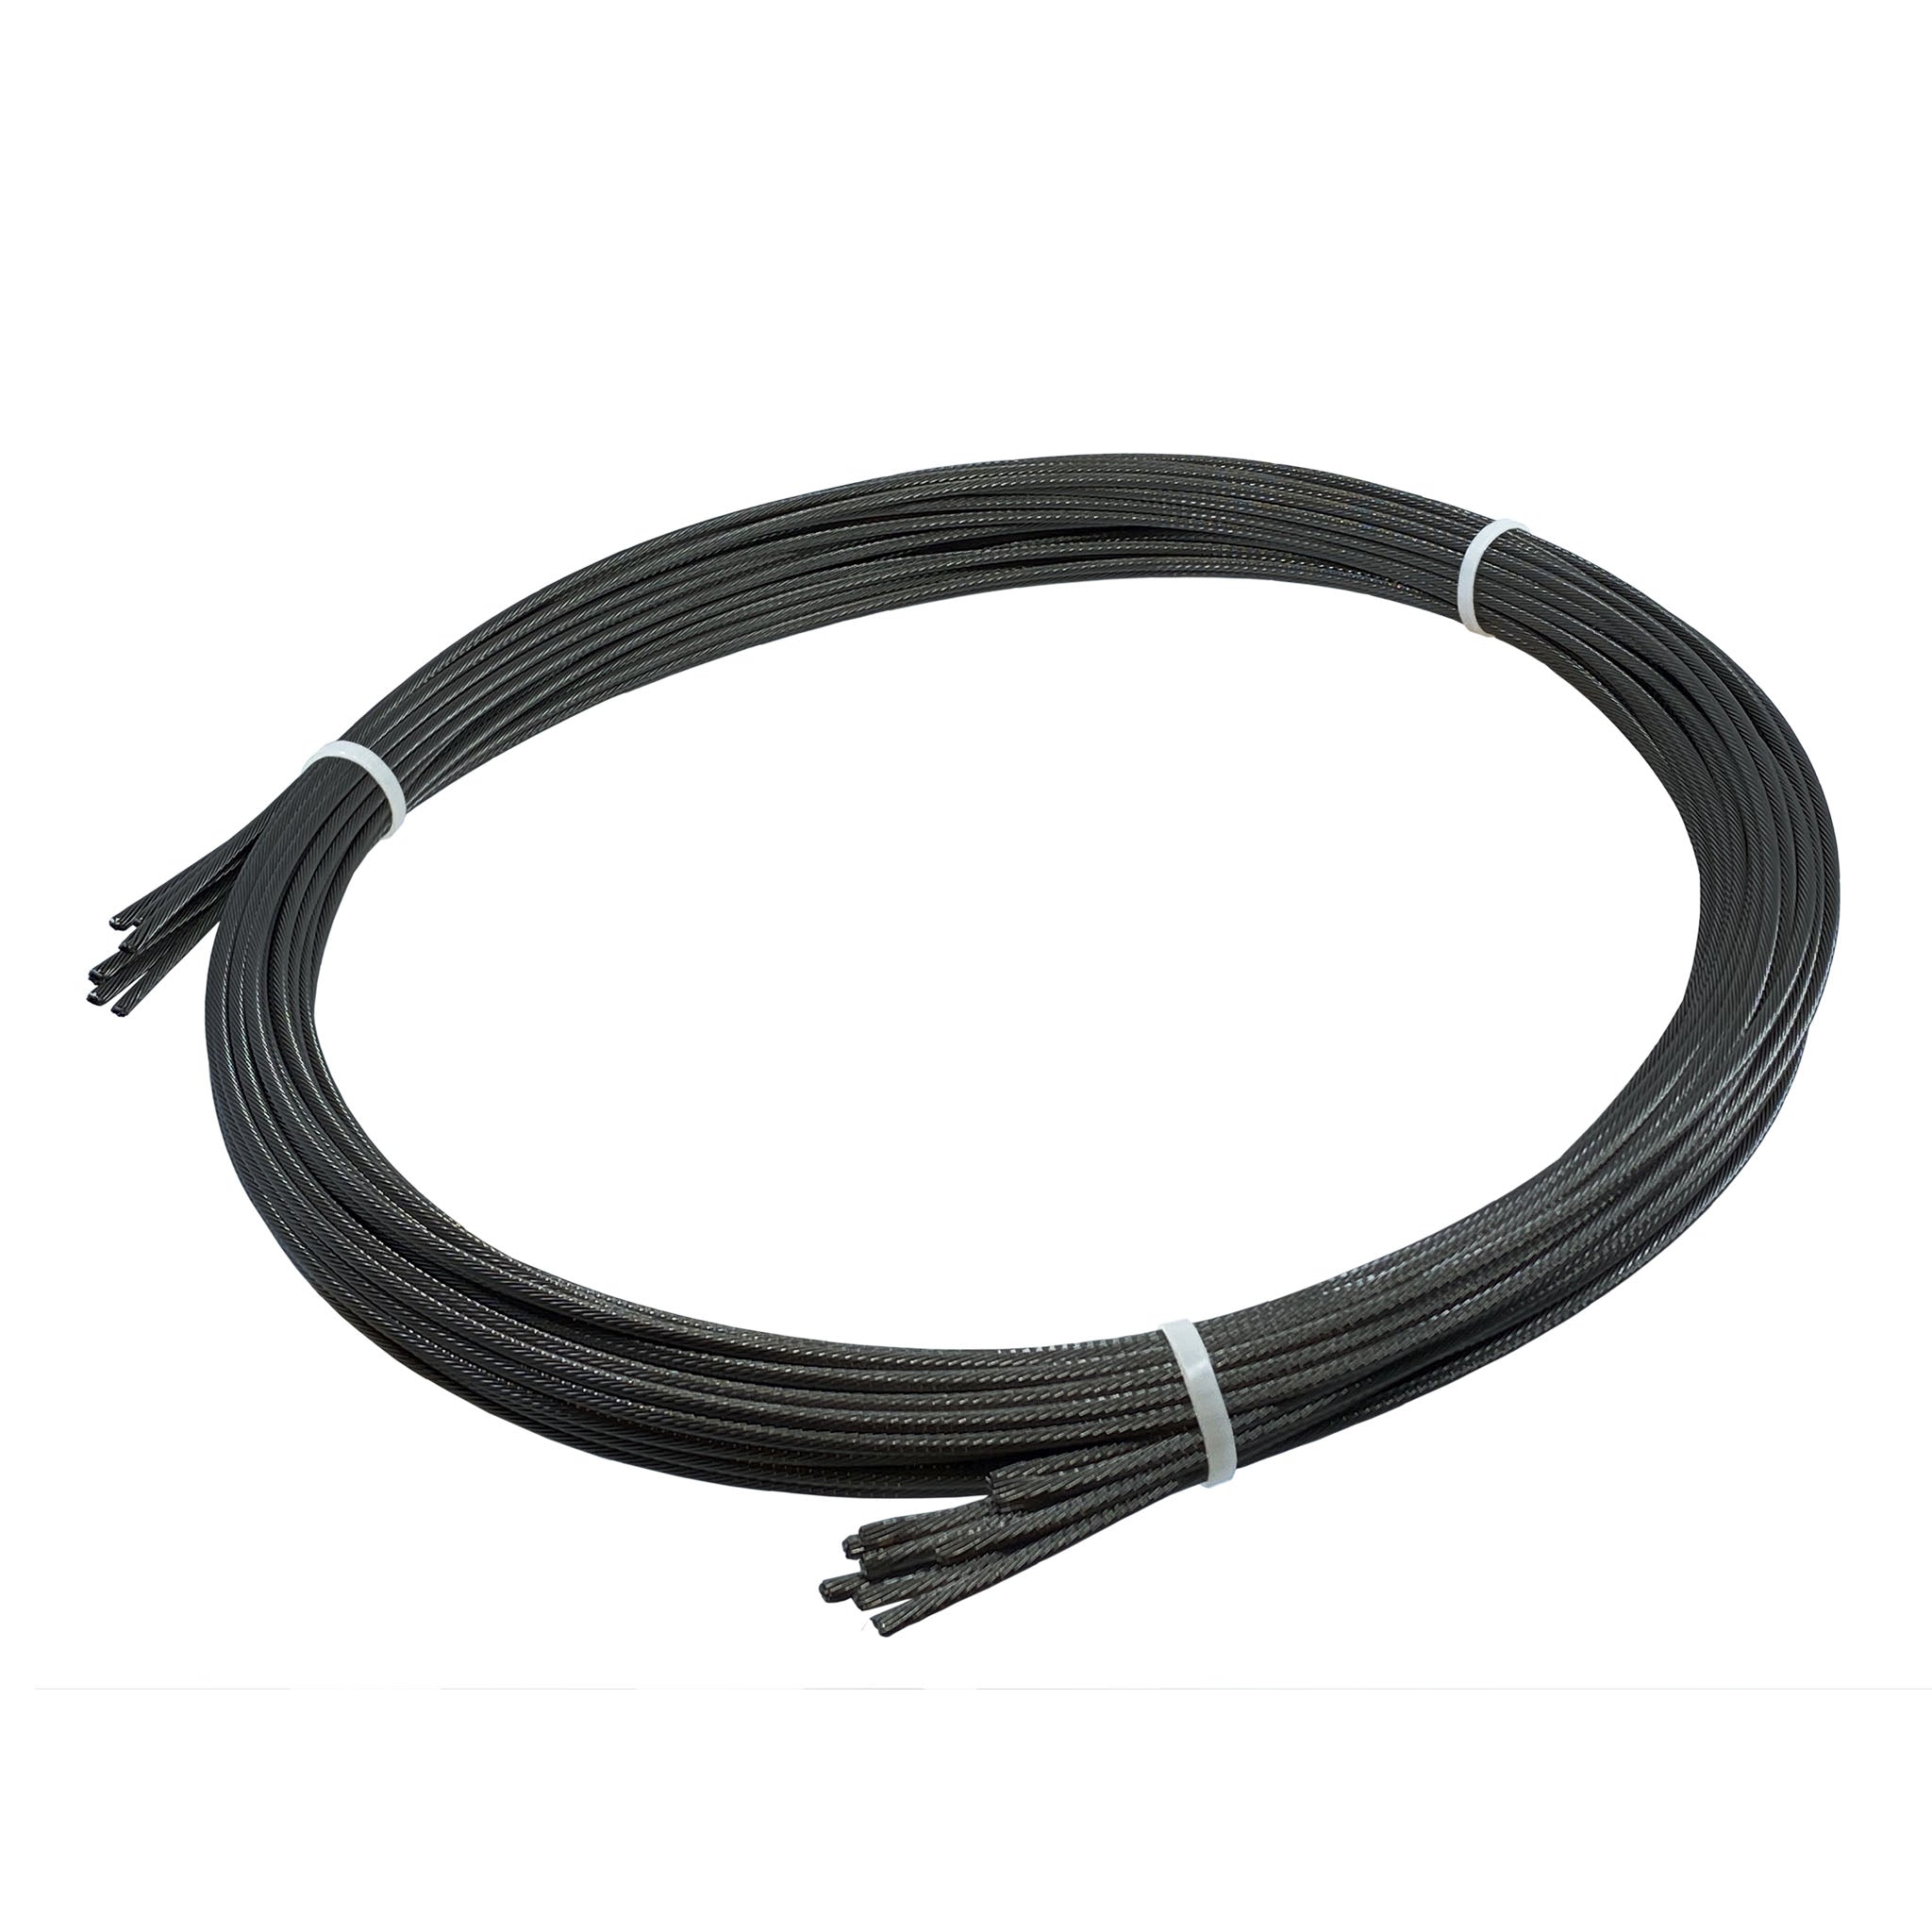 Black Stainless Cable Bundles - For Cable Railing Horizontal or